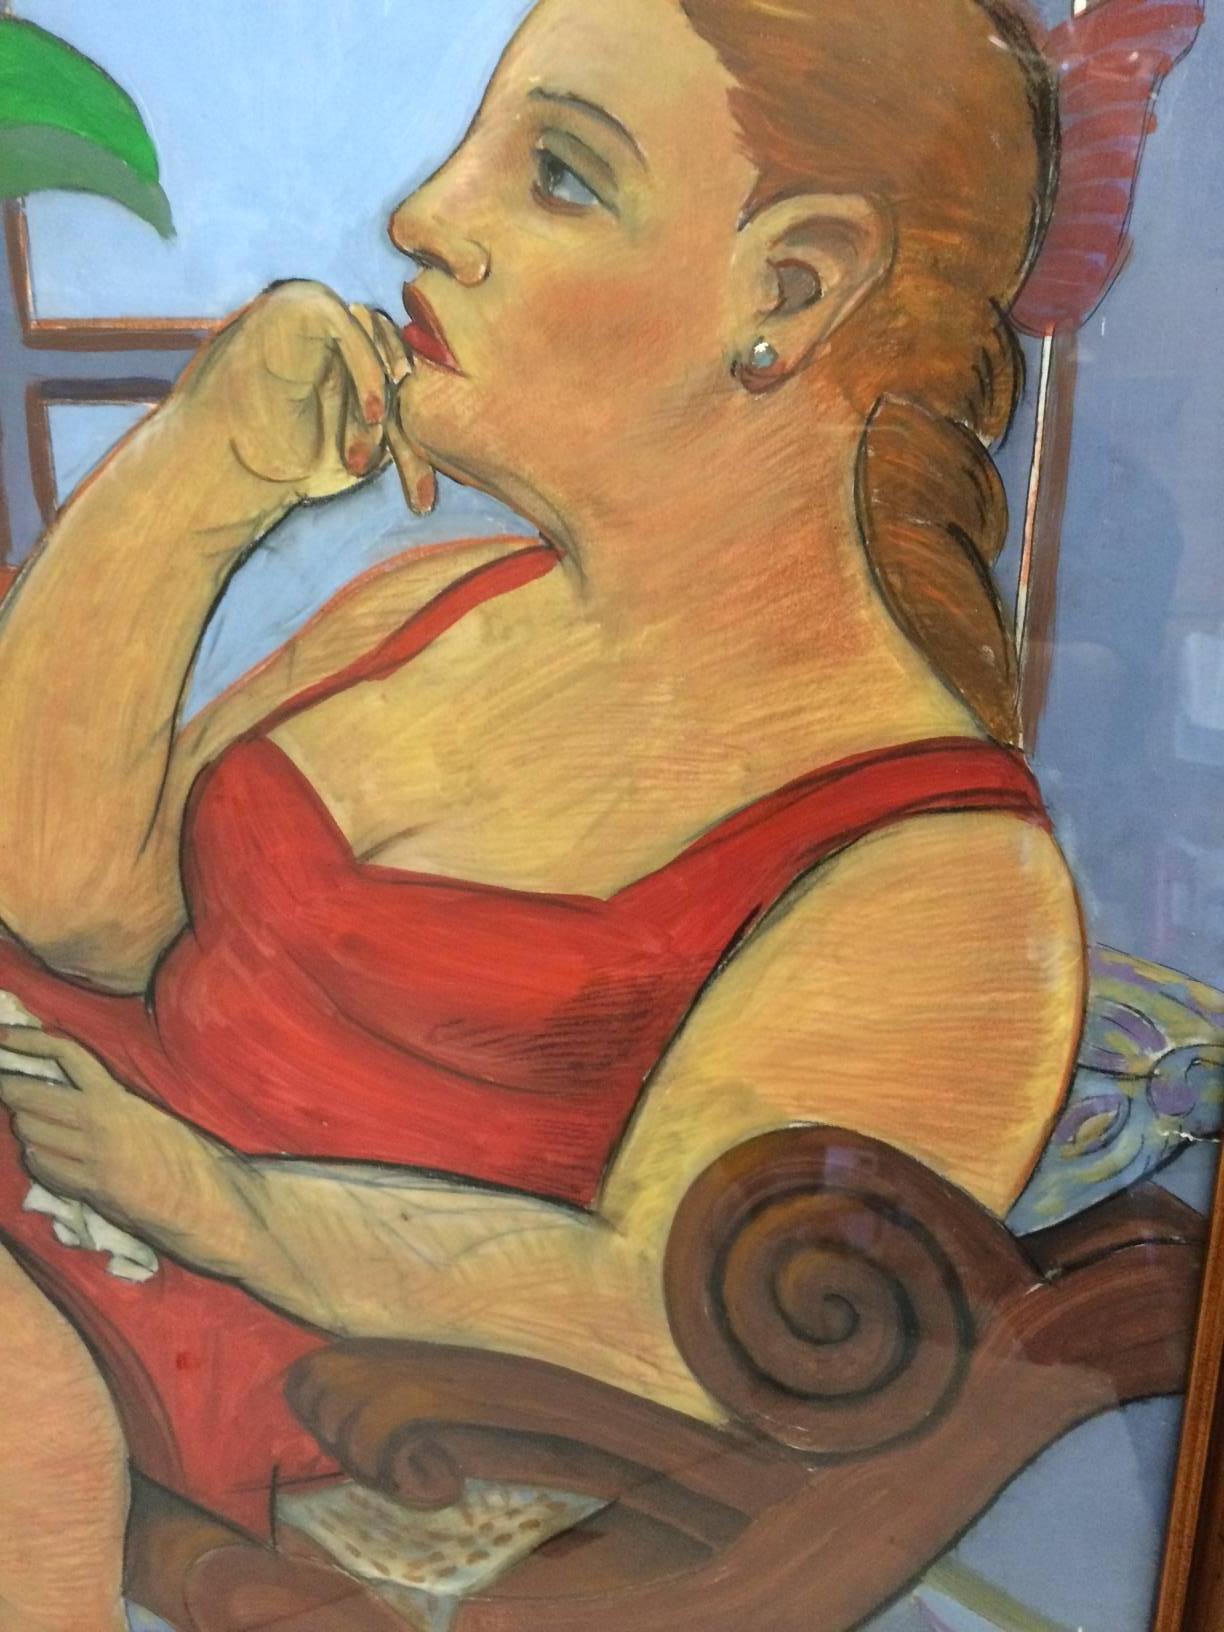 This pastel drawing of a female figure is dynamic in its use of cool and warm colors and the complementary red and green. The drawing pictures a women seated in an antique chair wearing a red dress and looking off the left side of the picture. It